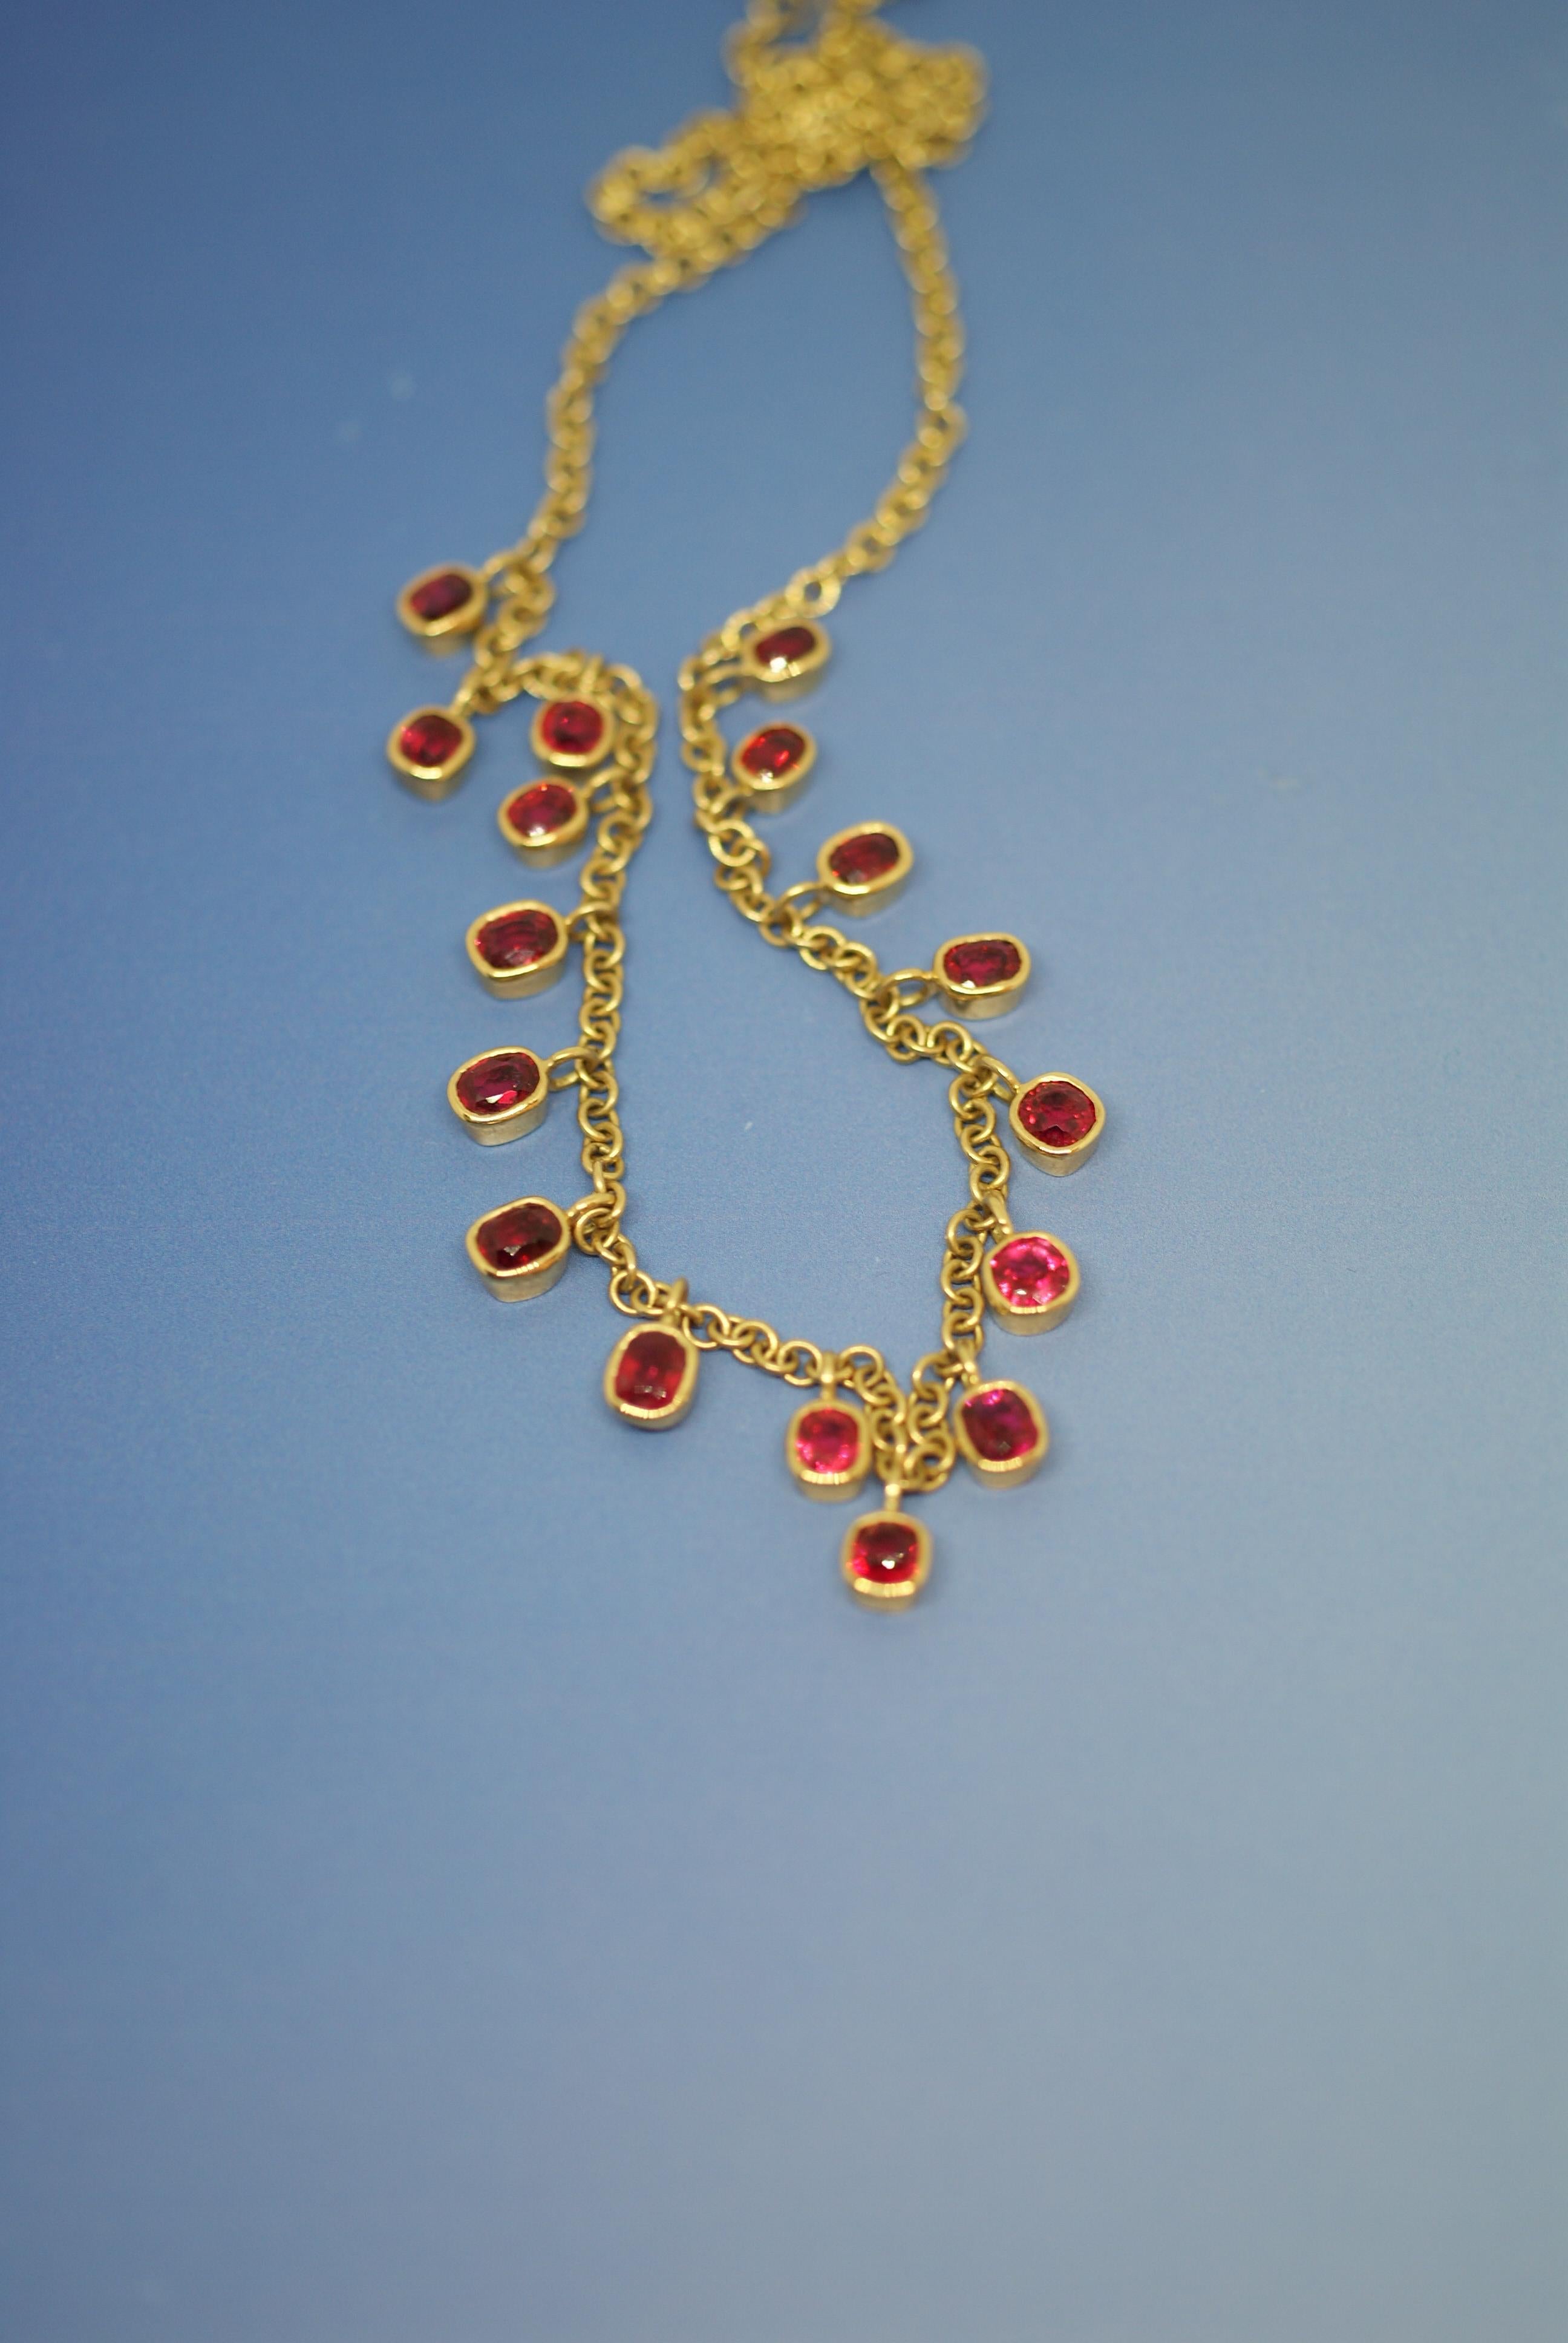 Designed as a fringe of cushion-cut spinel, suspended from an 18K gold circular link necklace

Description:
Gem materials: 17 cushion-cut spinels weighing approximately 6.98 cts., all from Burma and all natural.